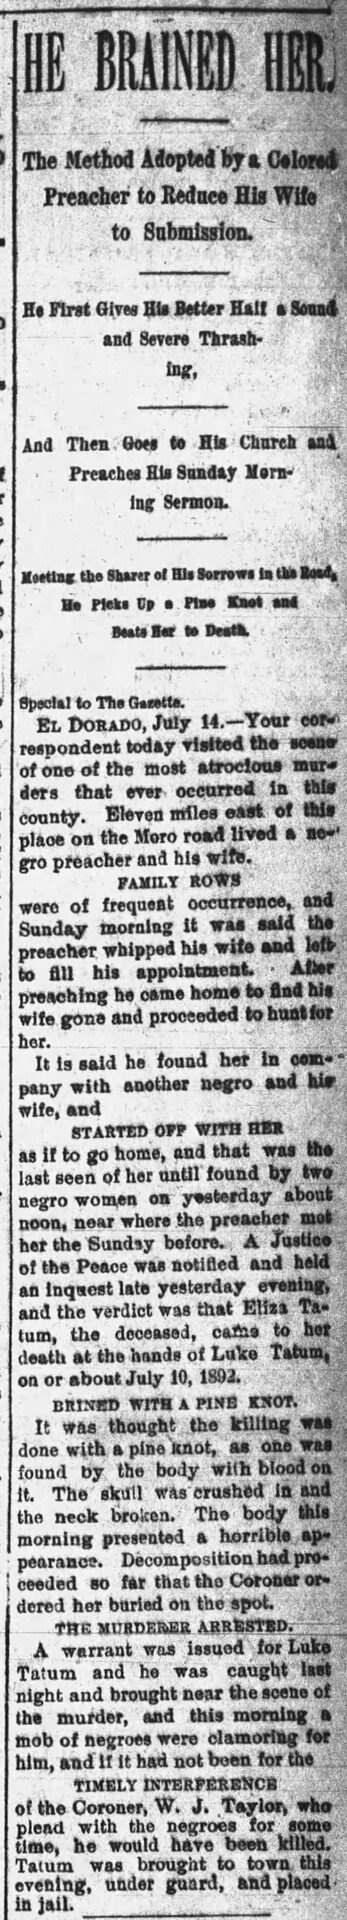 "He Brained Her" newspaper clipping